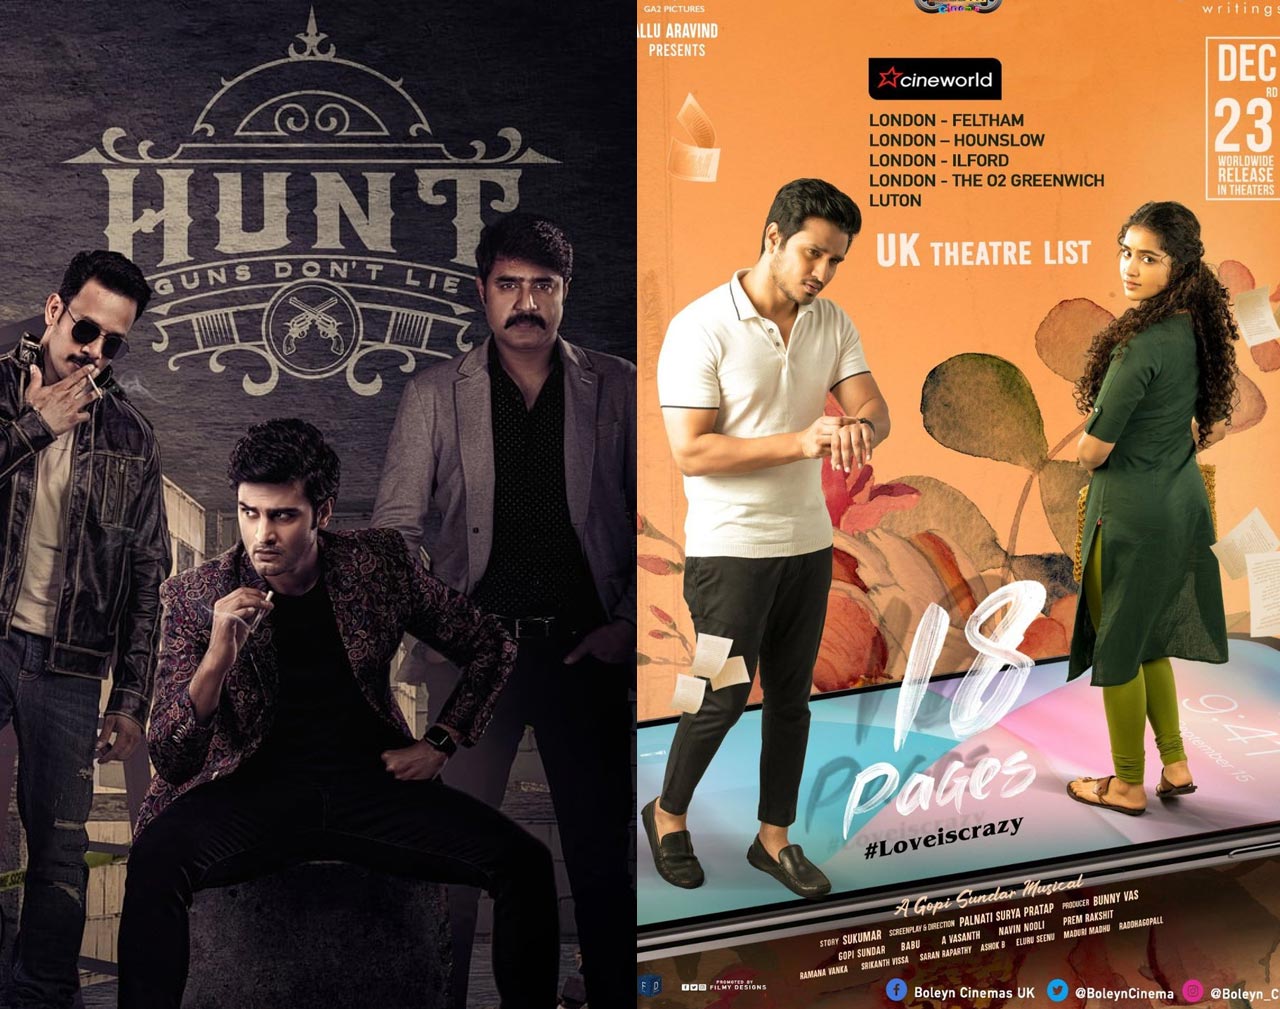 Releases In Theatre And OTT This Week